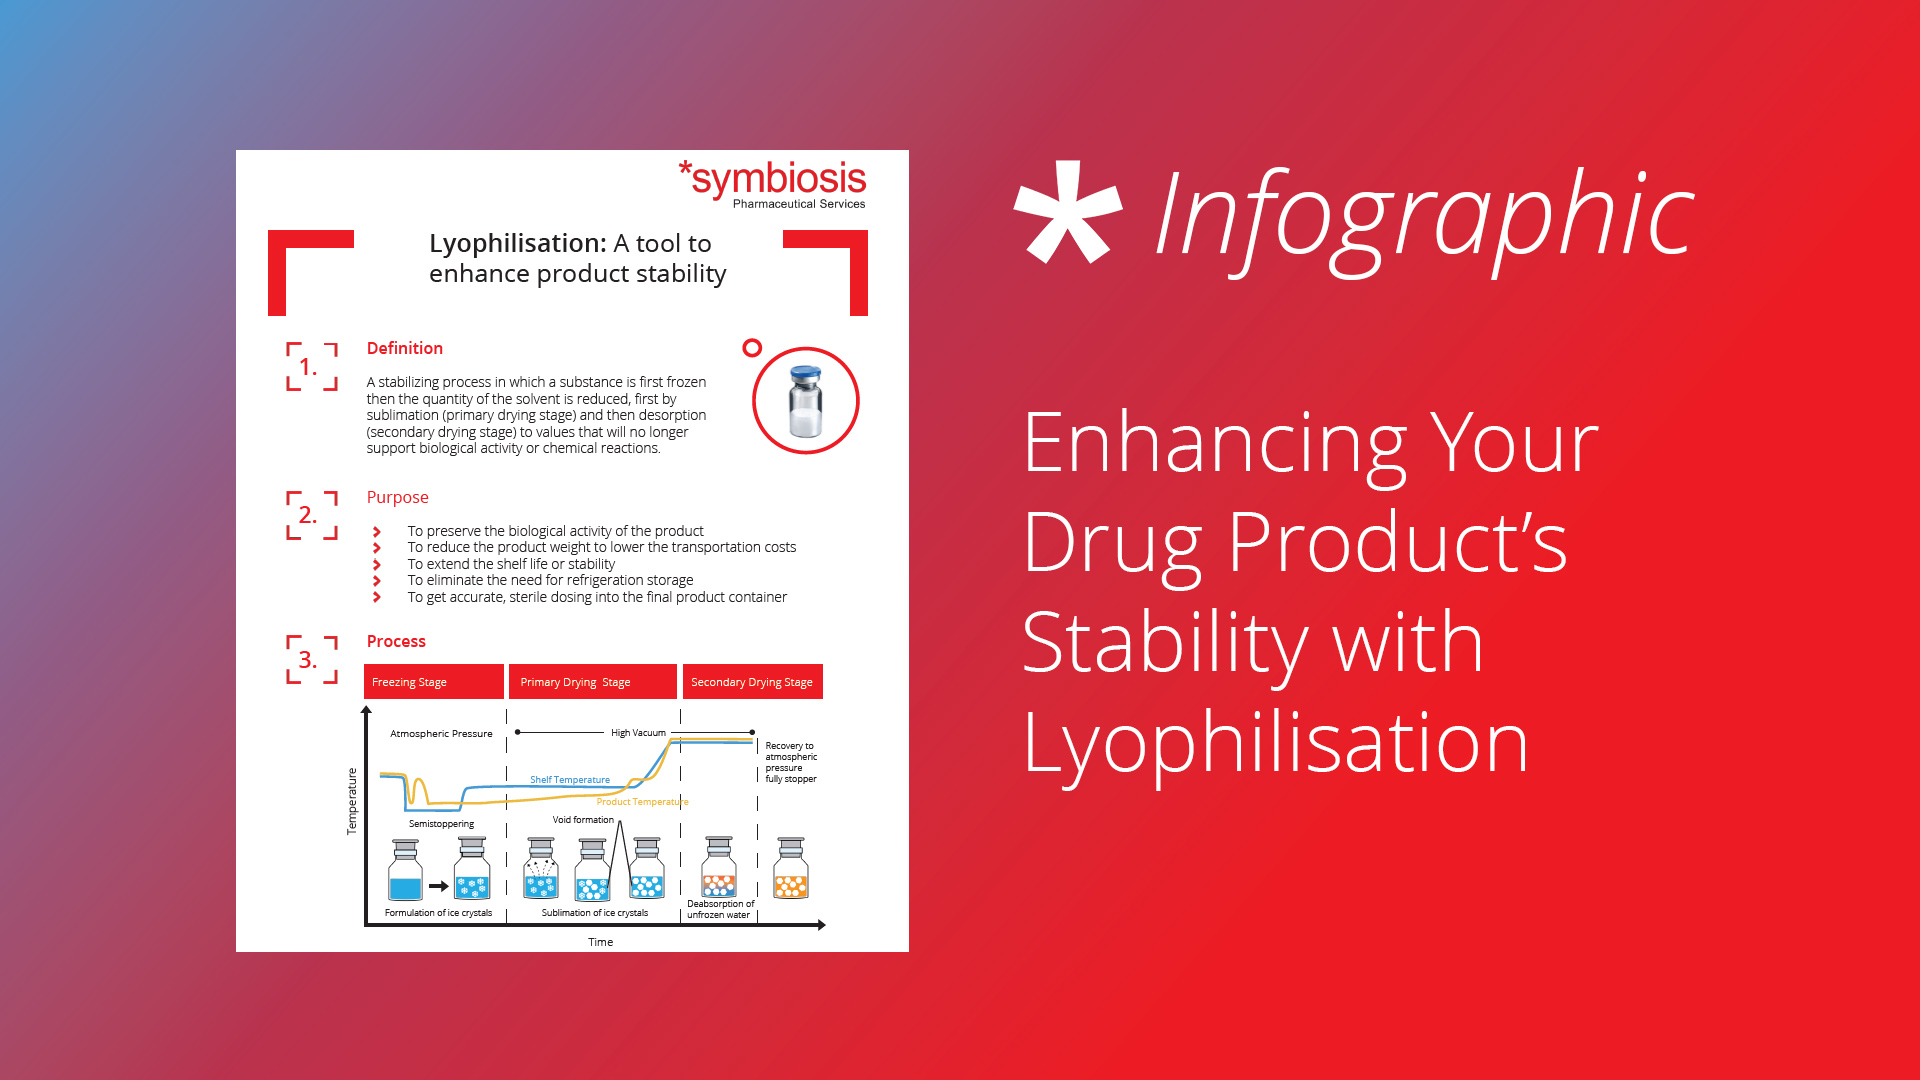 Infographic: Enhancing Your Drug Product’s Stability with Lyophilisation